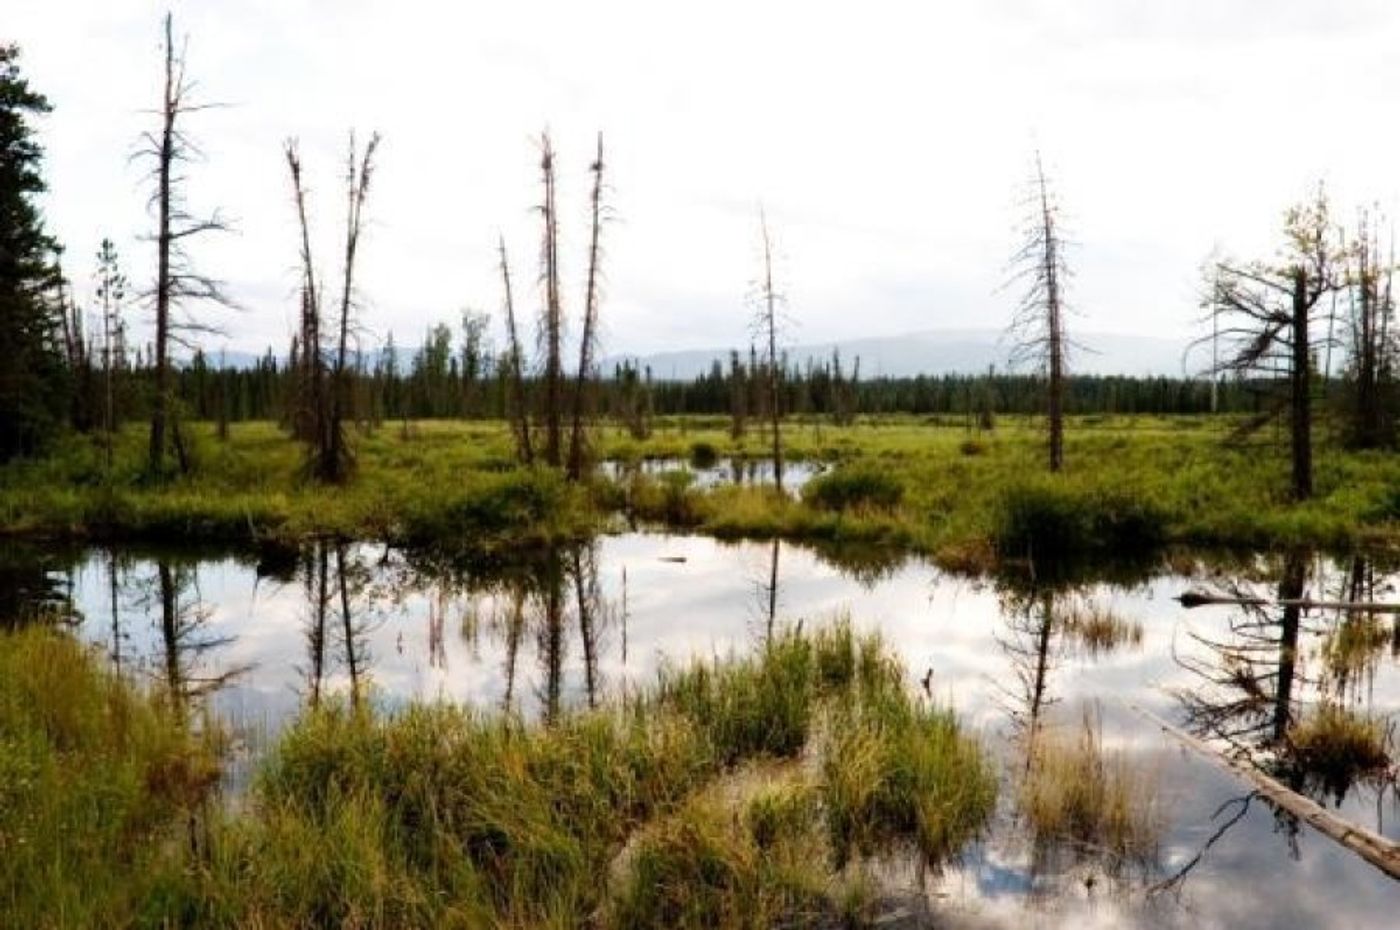 Black spruce put peat bogs at greater risk of fire. Photo: Science Daily